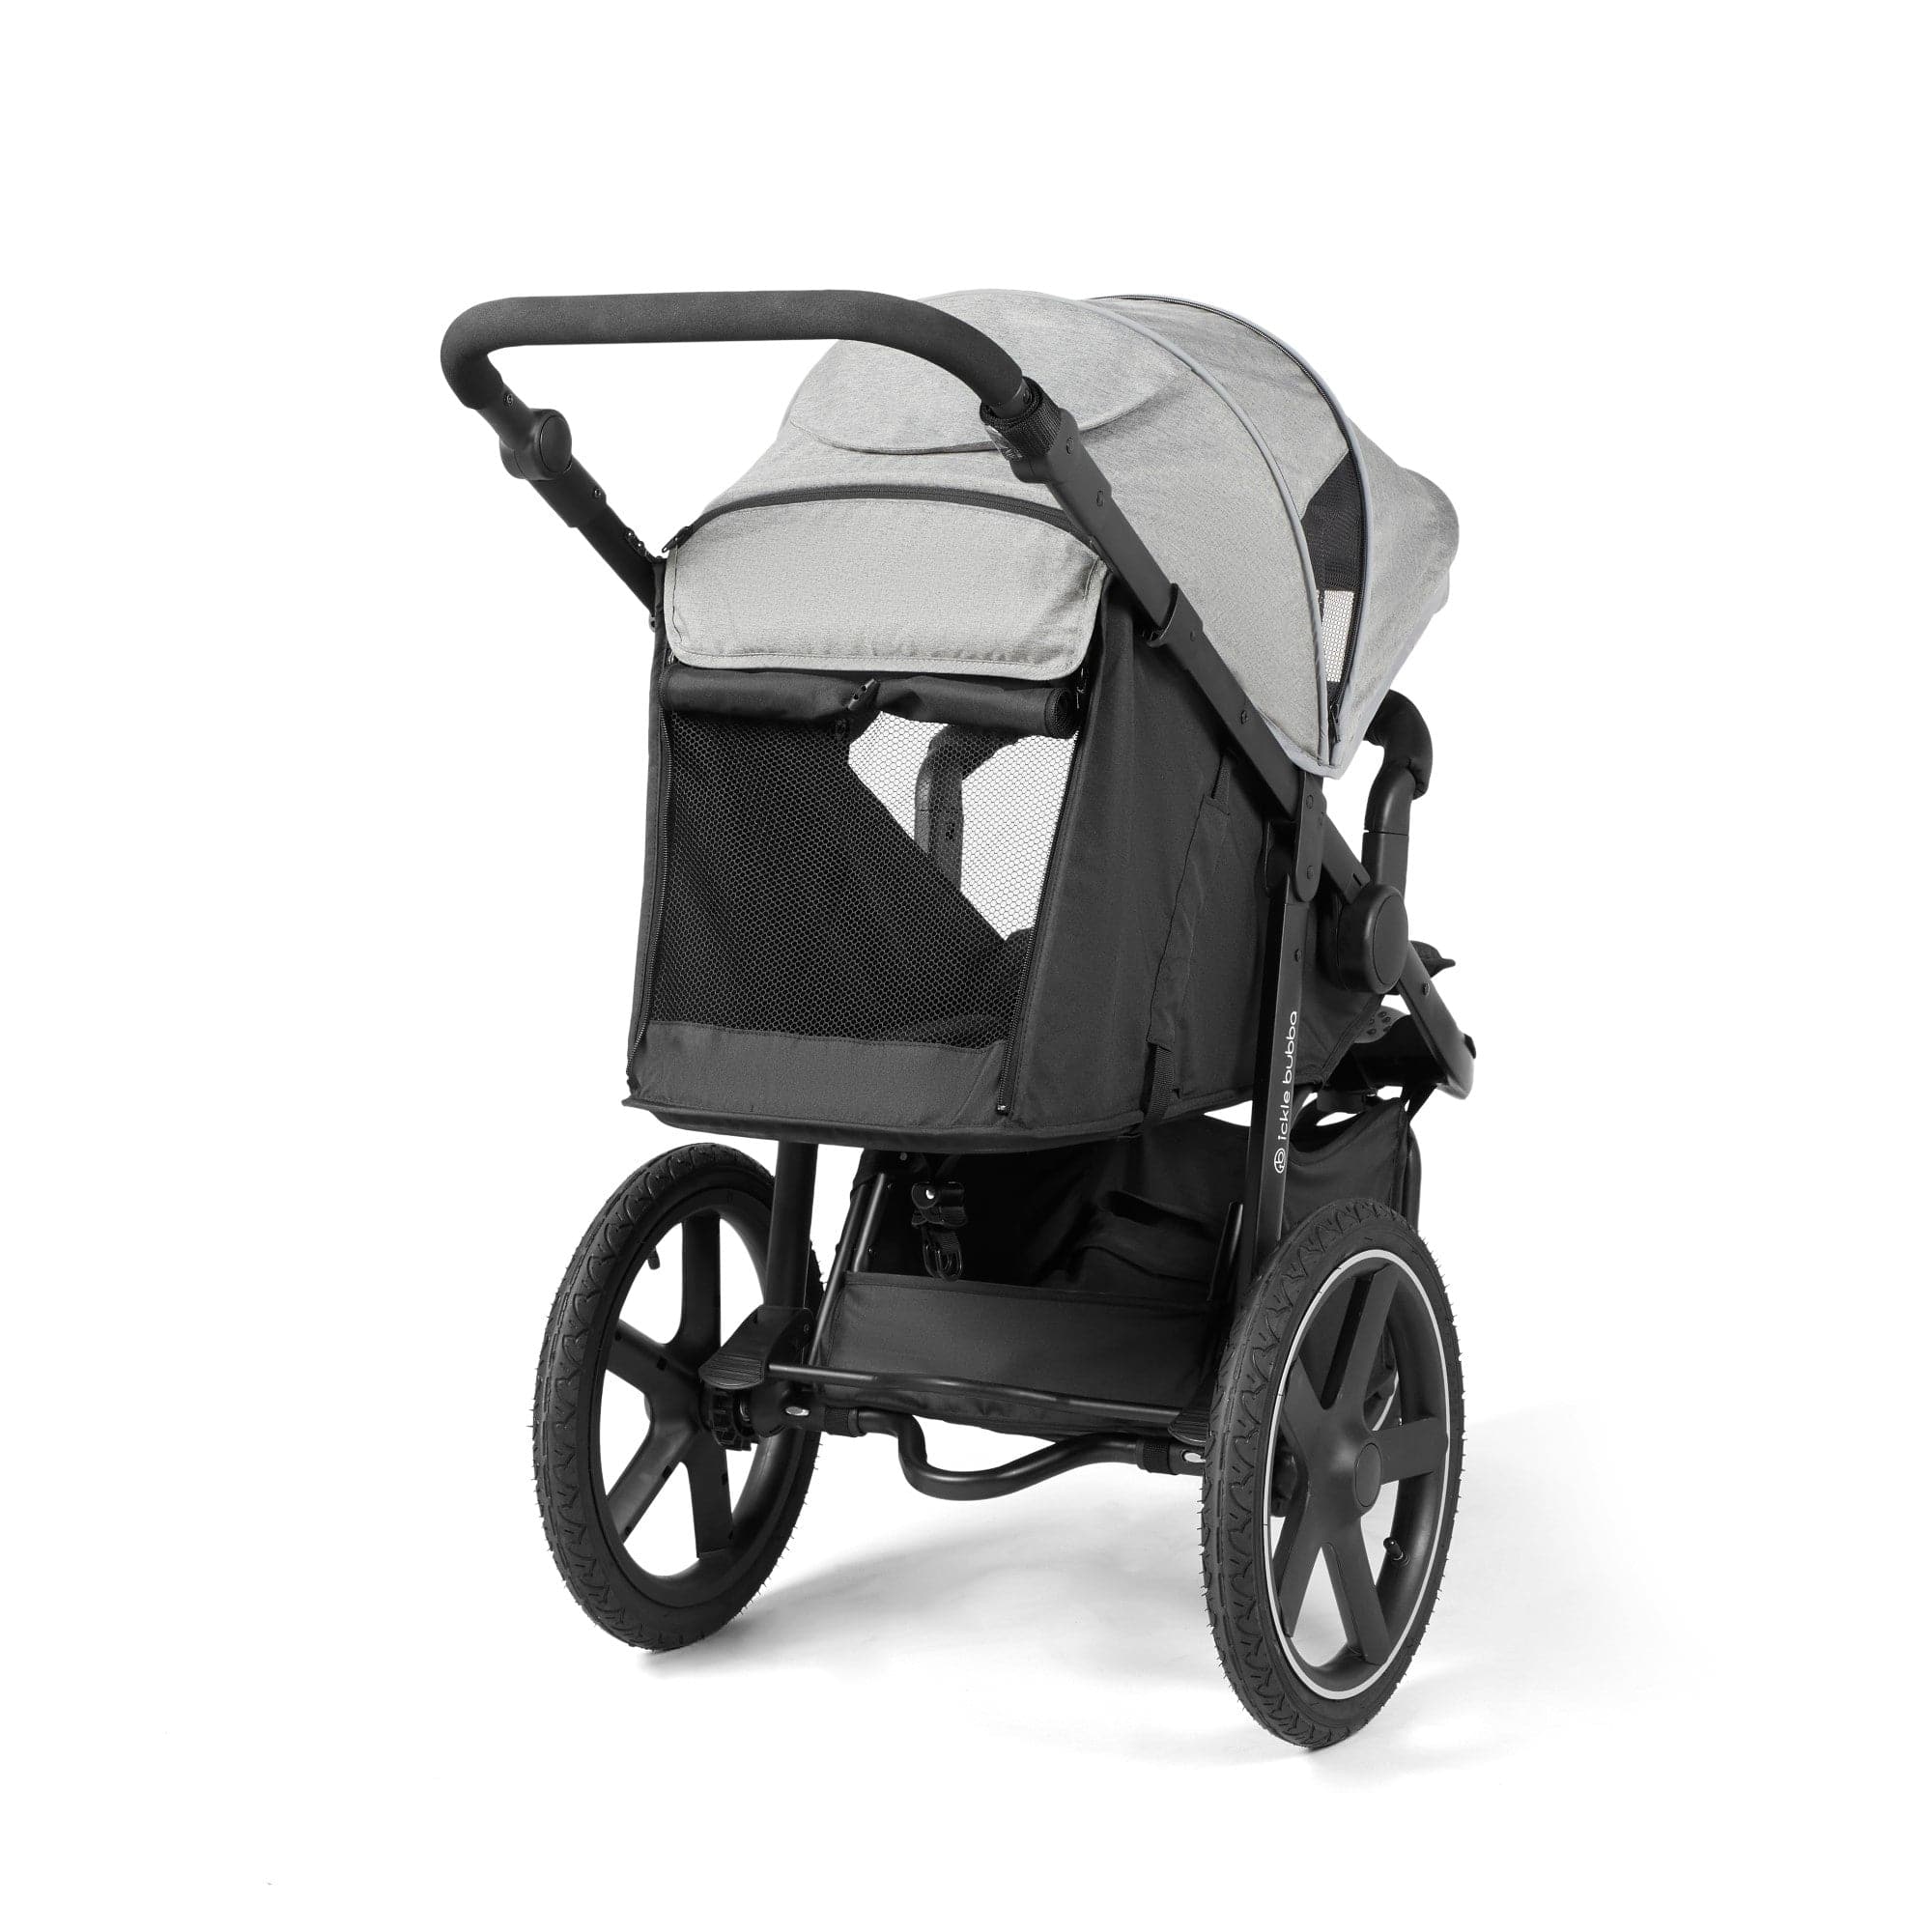 Ickle Bubba Venus Venus Max Jogger 3 Wheel Stroller I-Size Travel System with Isofix Base - Space Grey -  | For Your Little One